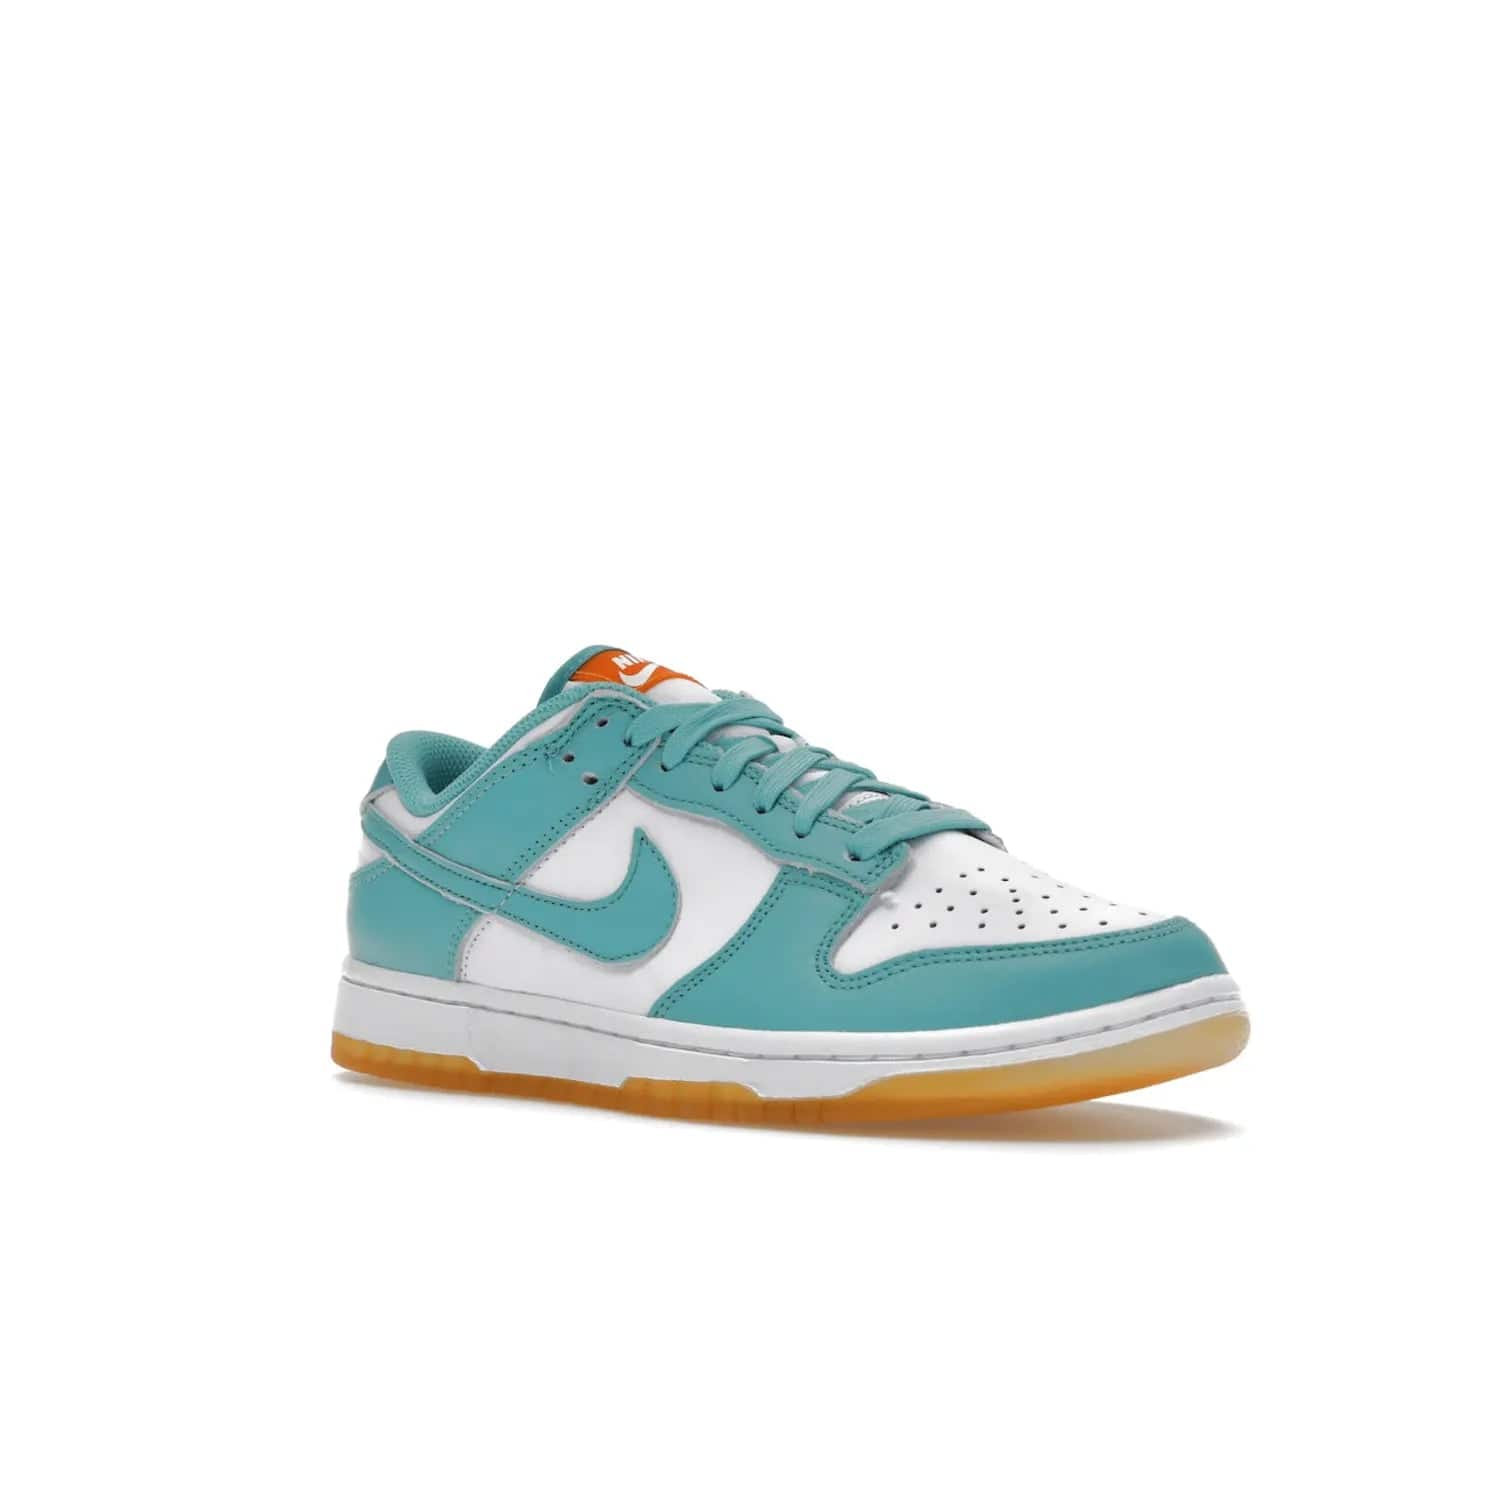 Nike Dunk Low Teal Zeal (Women's) - Image 5 - Only at www.BallersClubKickz.com - A white leather upper with teal overlays and Swooshes, plus yellow and embroidered accents make the Nike Dunk Low Teal Zeal (Women's) the perfect statement piece for any wardrobe.